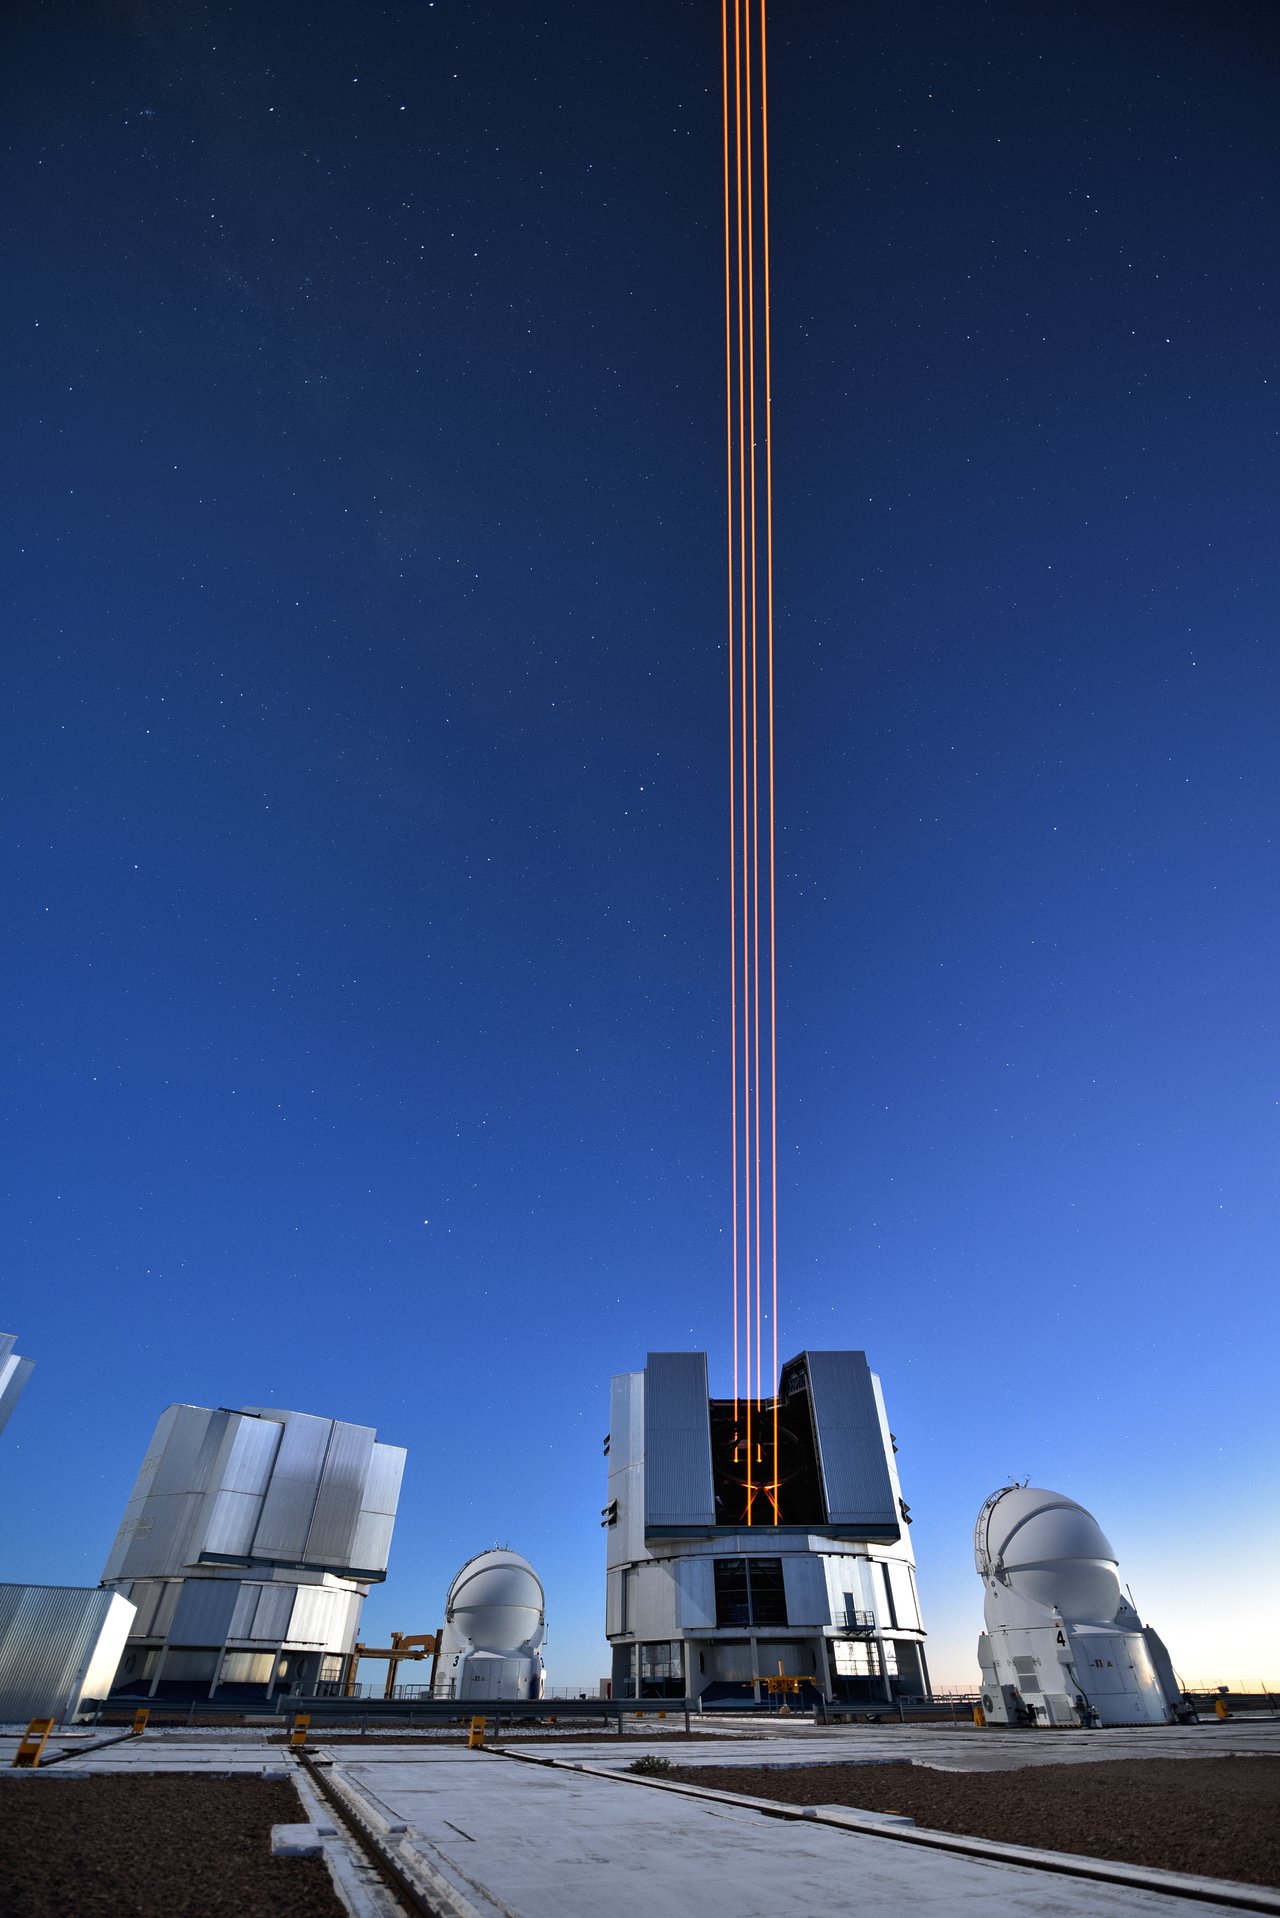 Paranal Chile - the ESO's part in the Holographic Universe